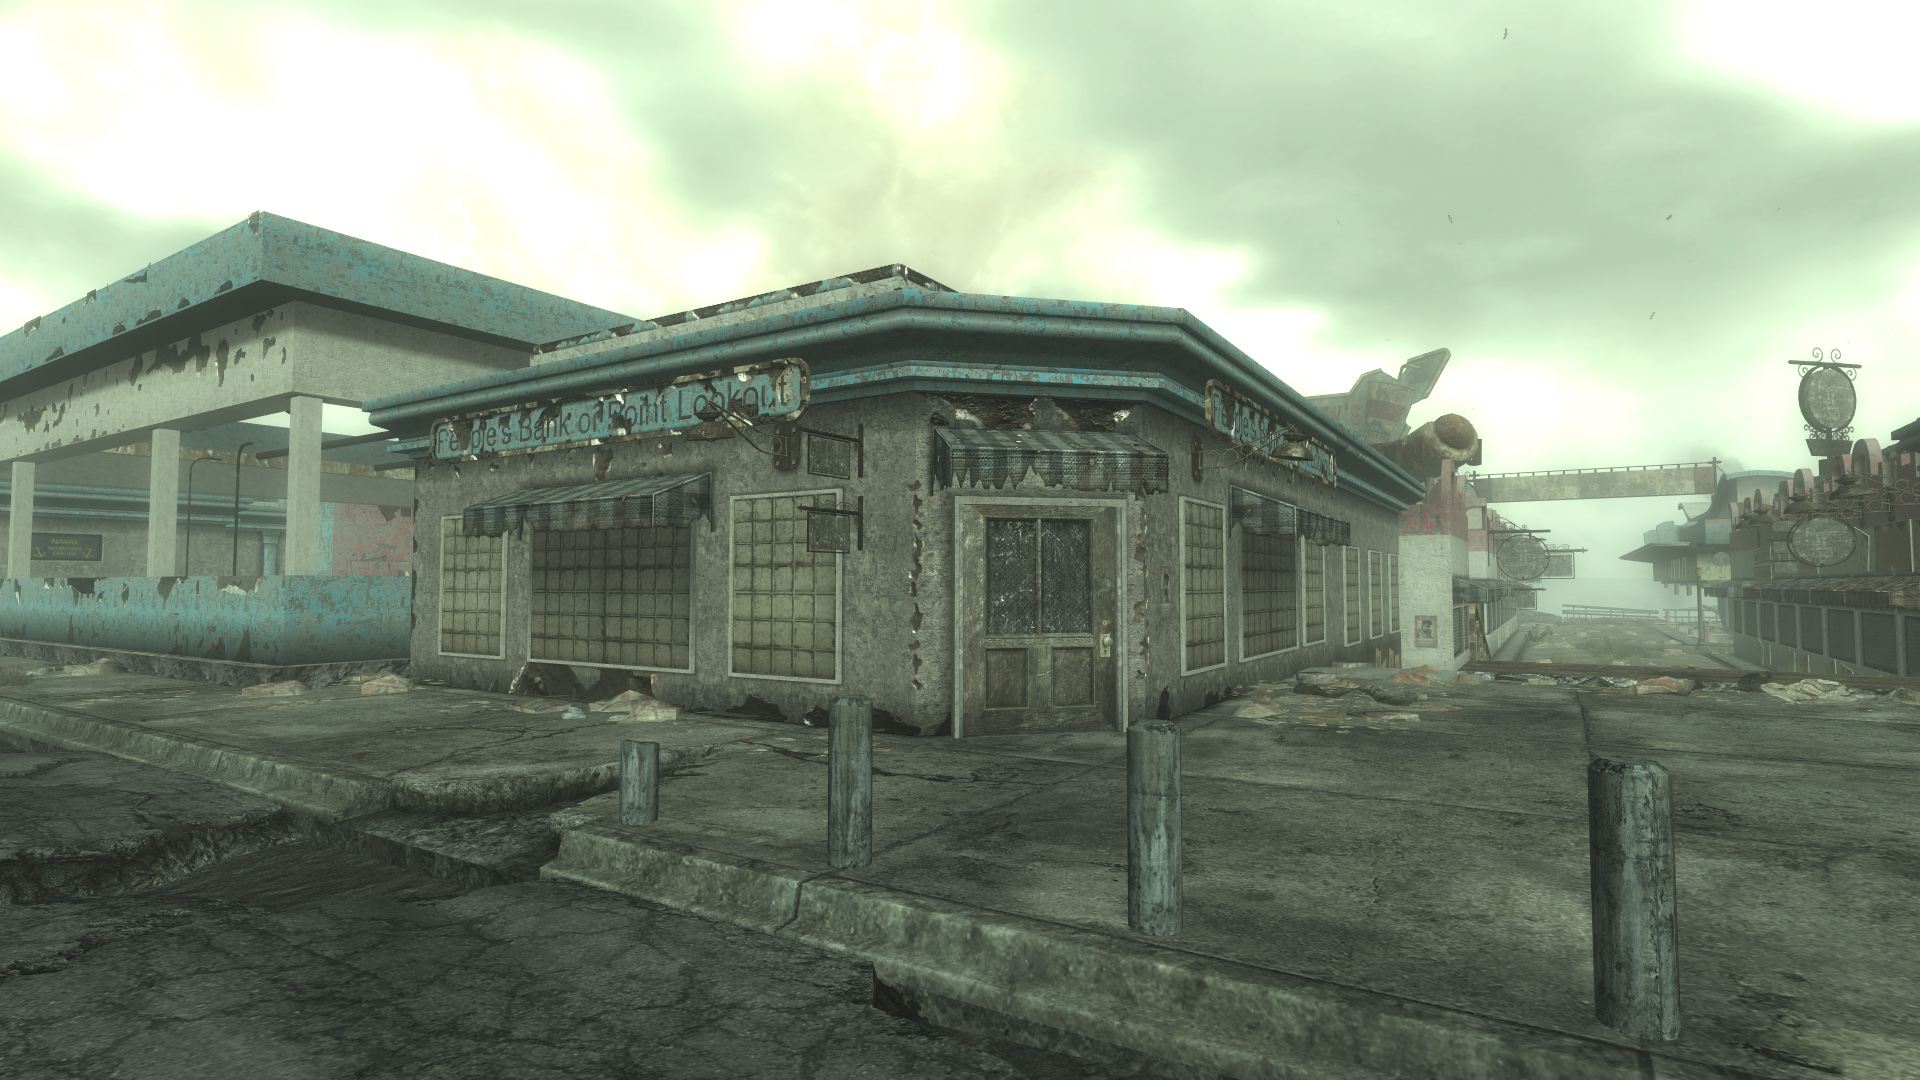 Point Lookout — Fallout 4 : Capital Wasteland